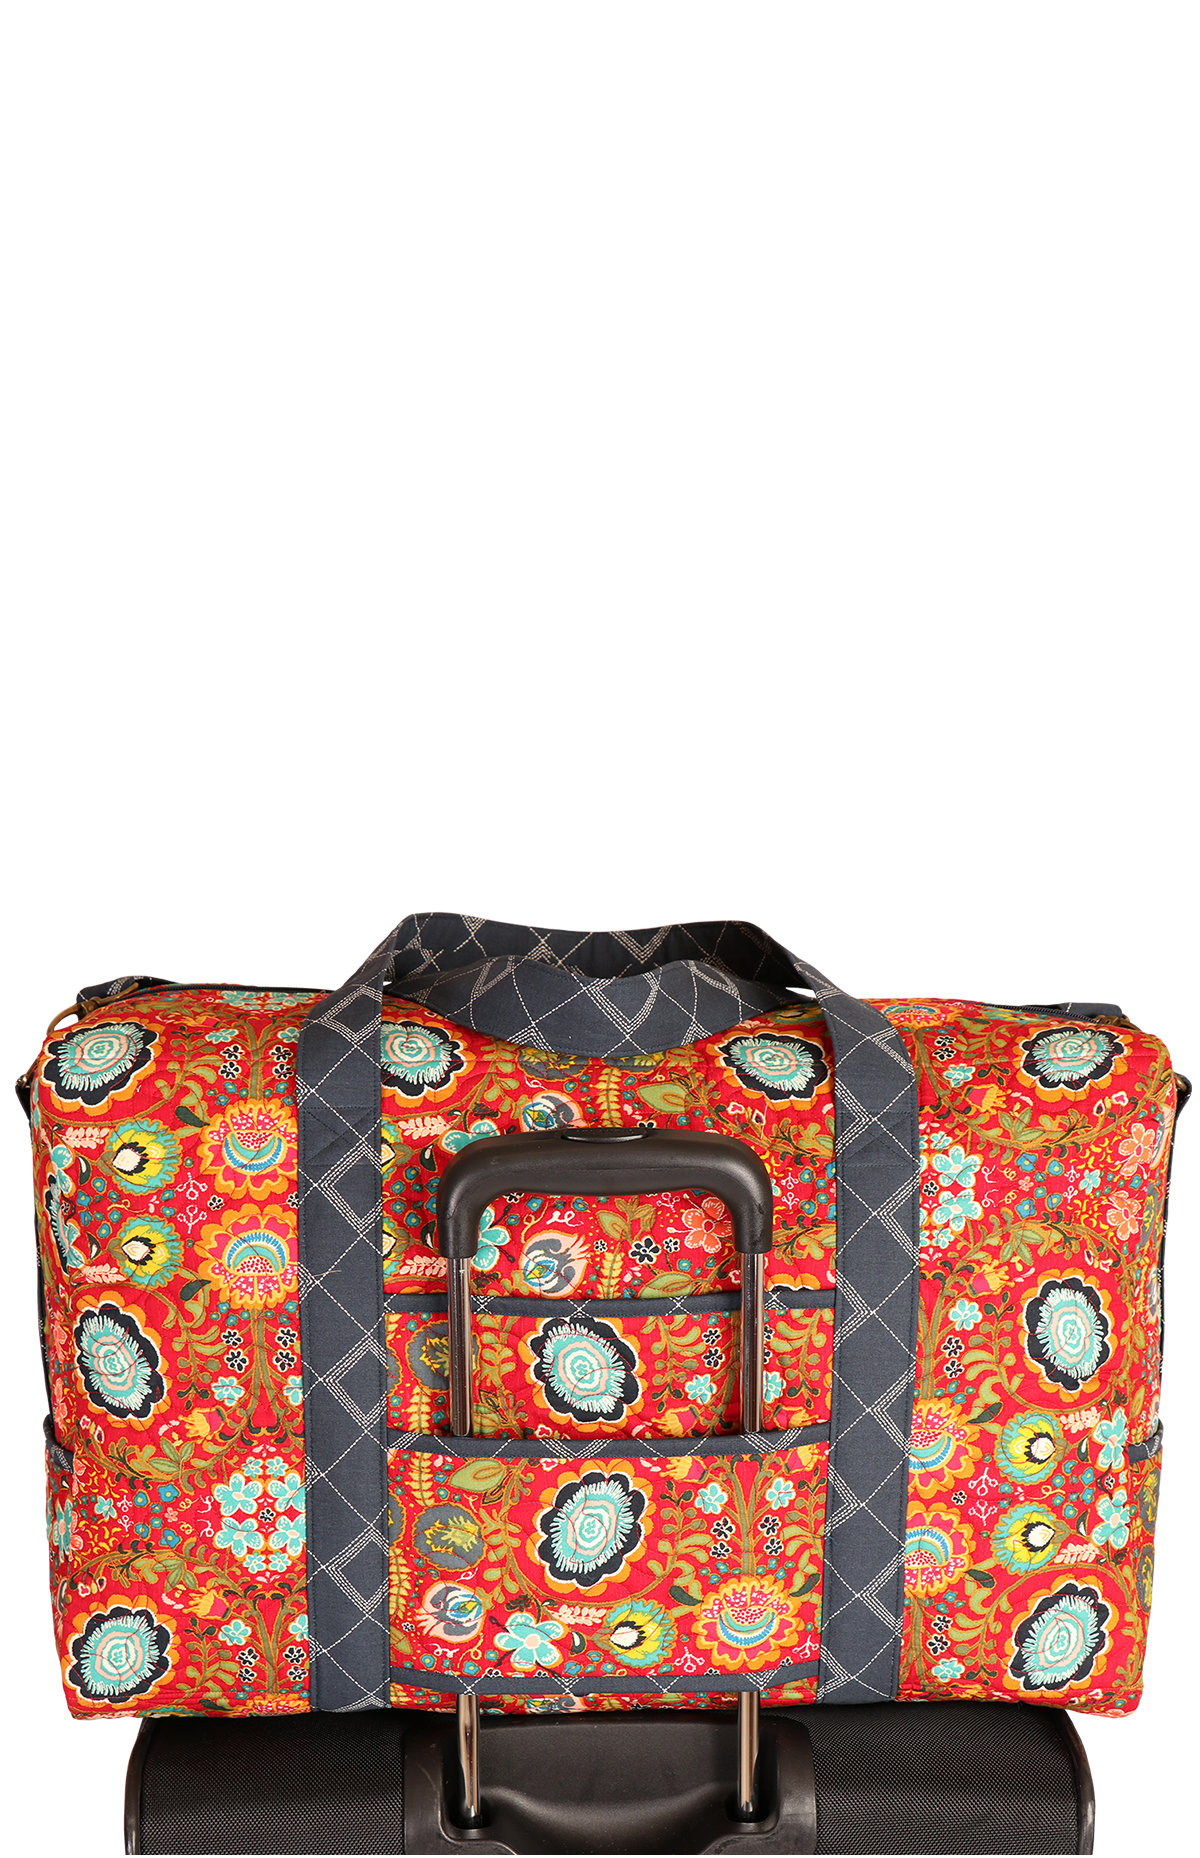 New Duffle Bag Pattern Carry on Sized Travel Duffle With 